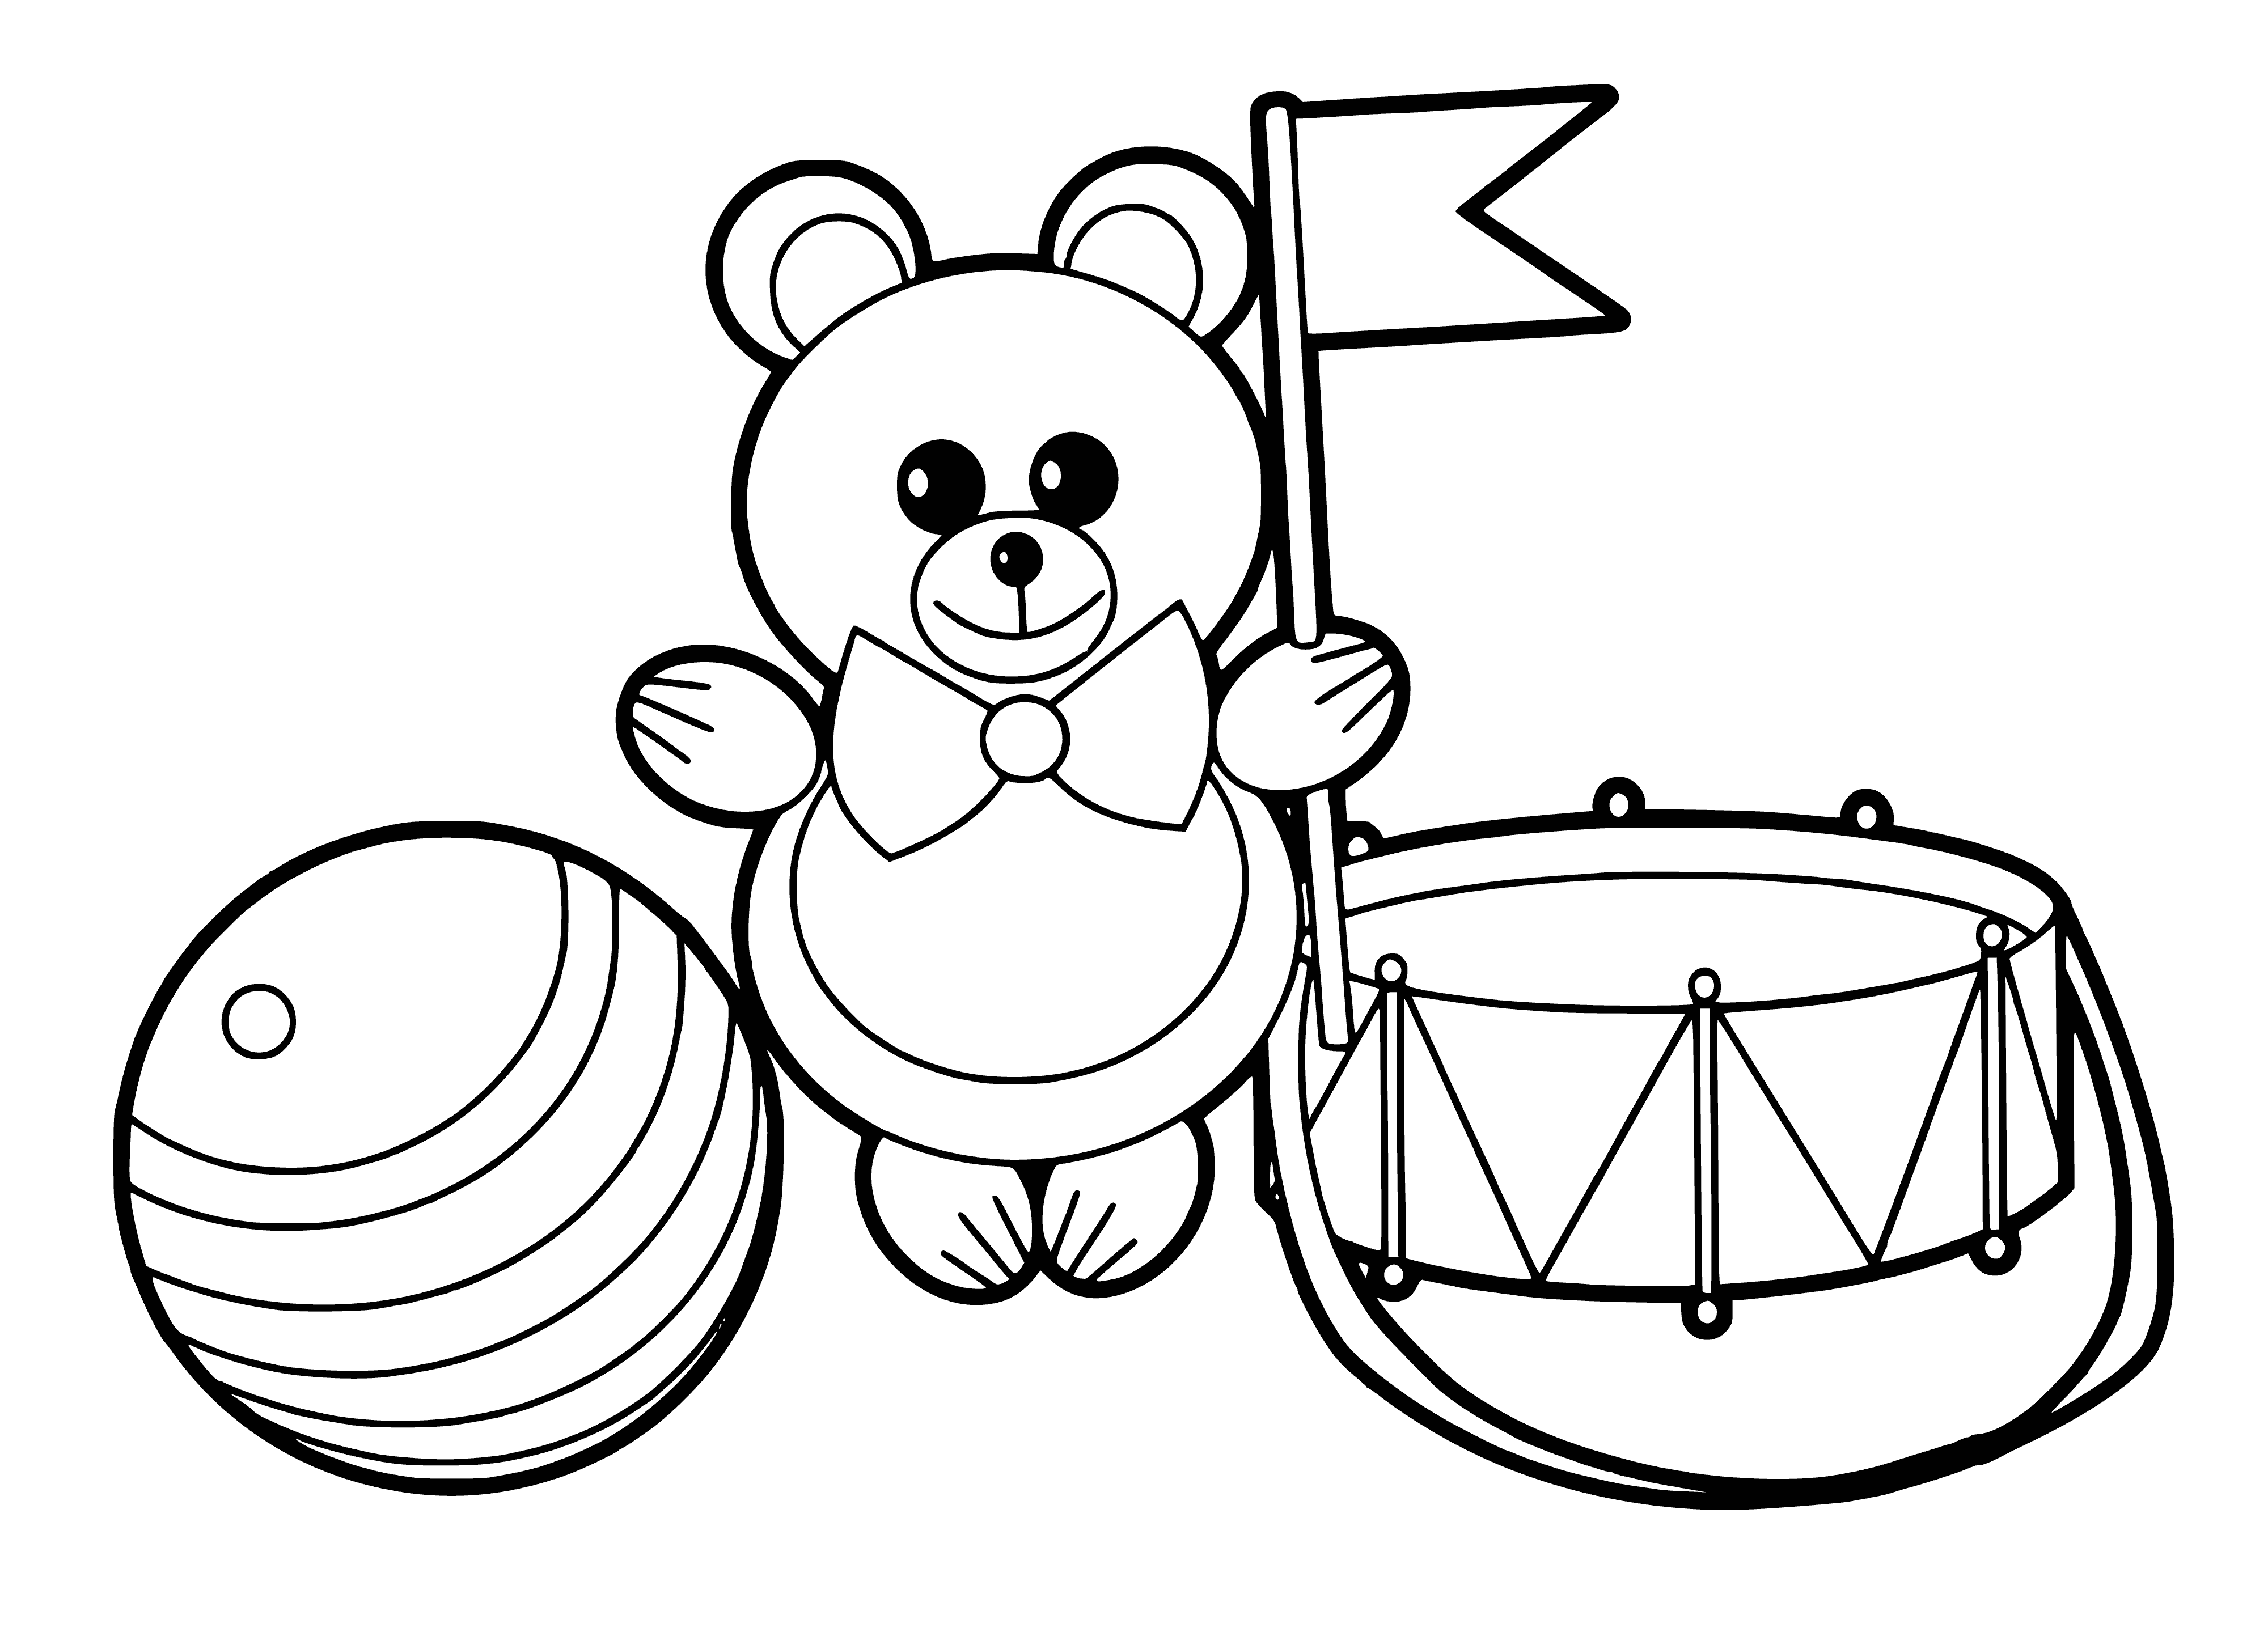 coloring page: A big teddy bear with a brown body, white belly, black eyes/nose/mouth & green shirt+blue scarf stands on two feet w/two arms+legs.